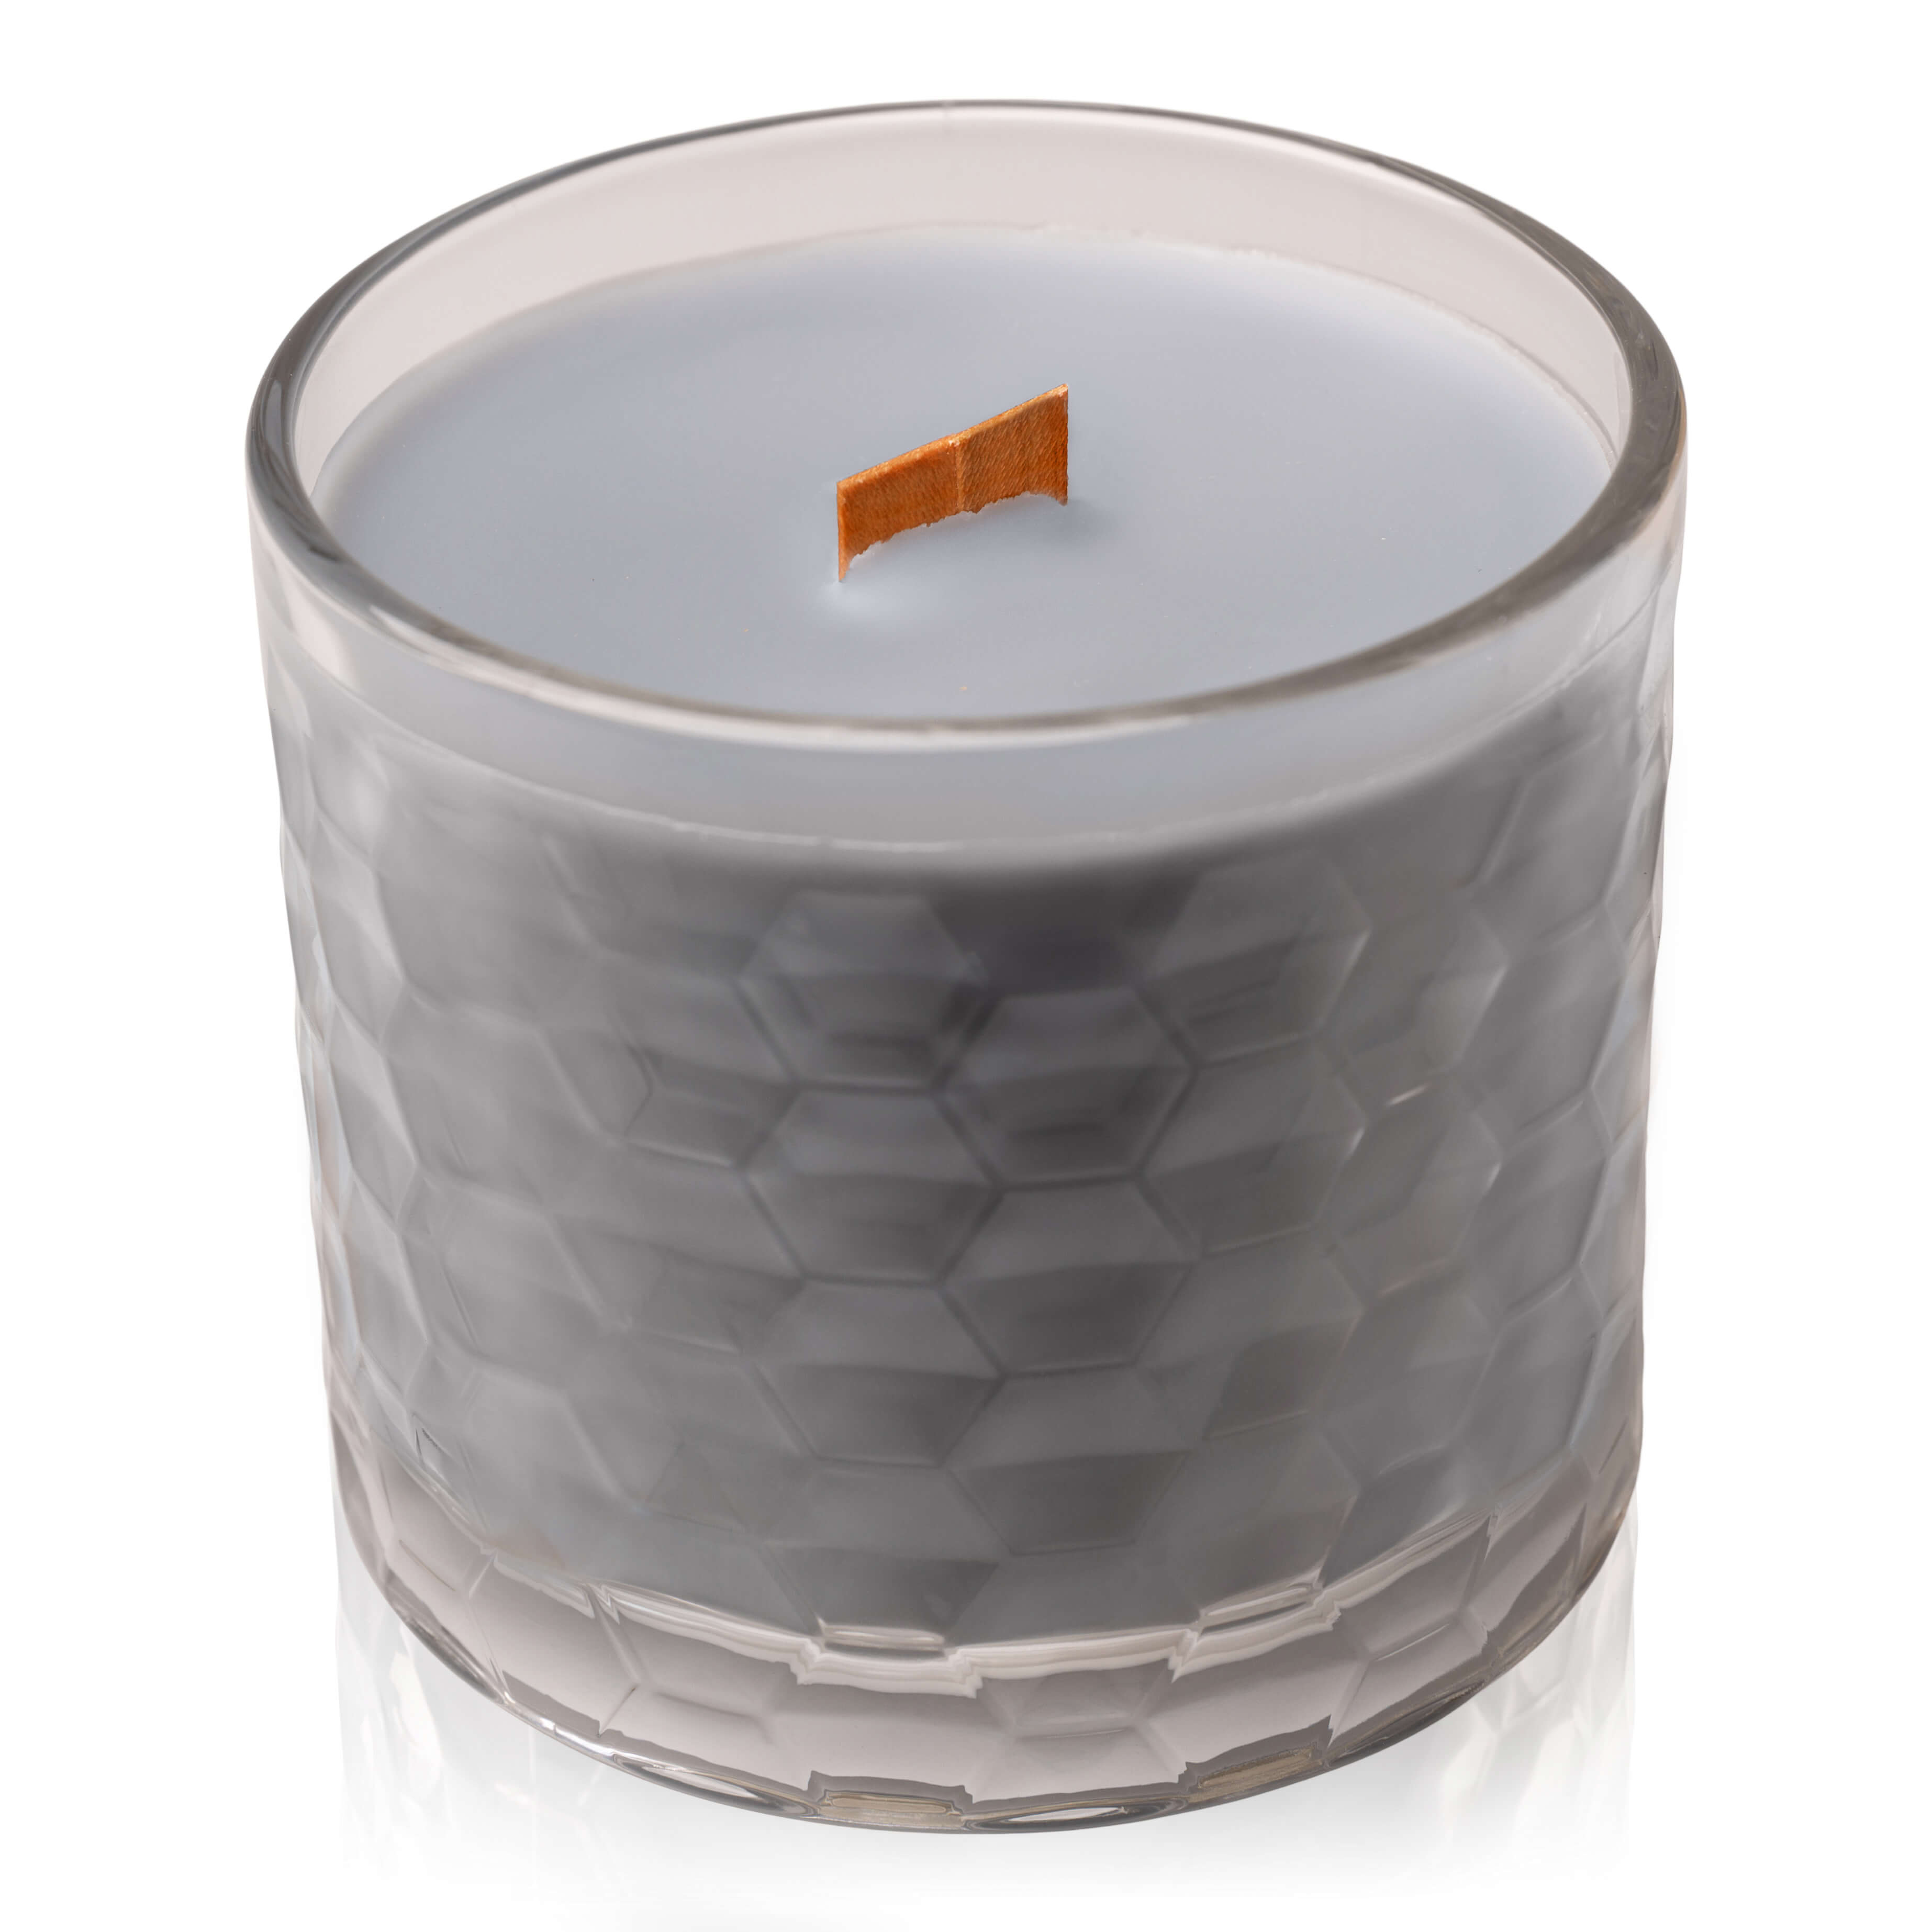 Burning - Signature Collection Candle